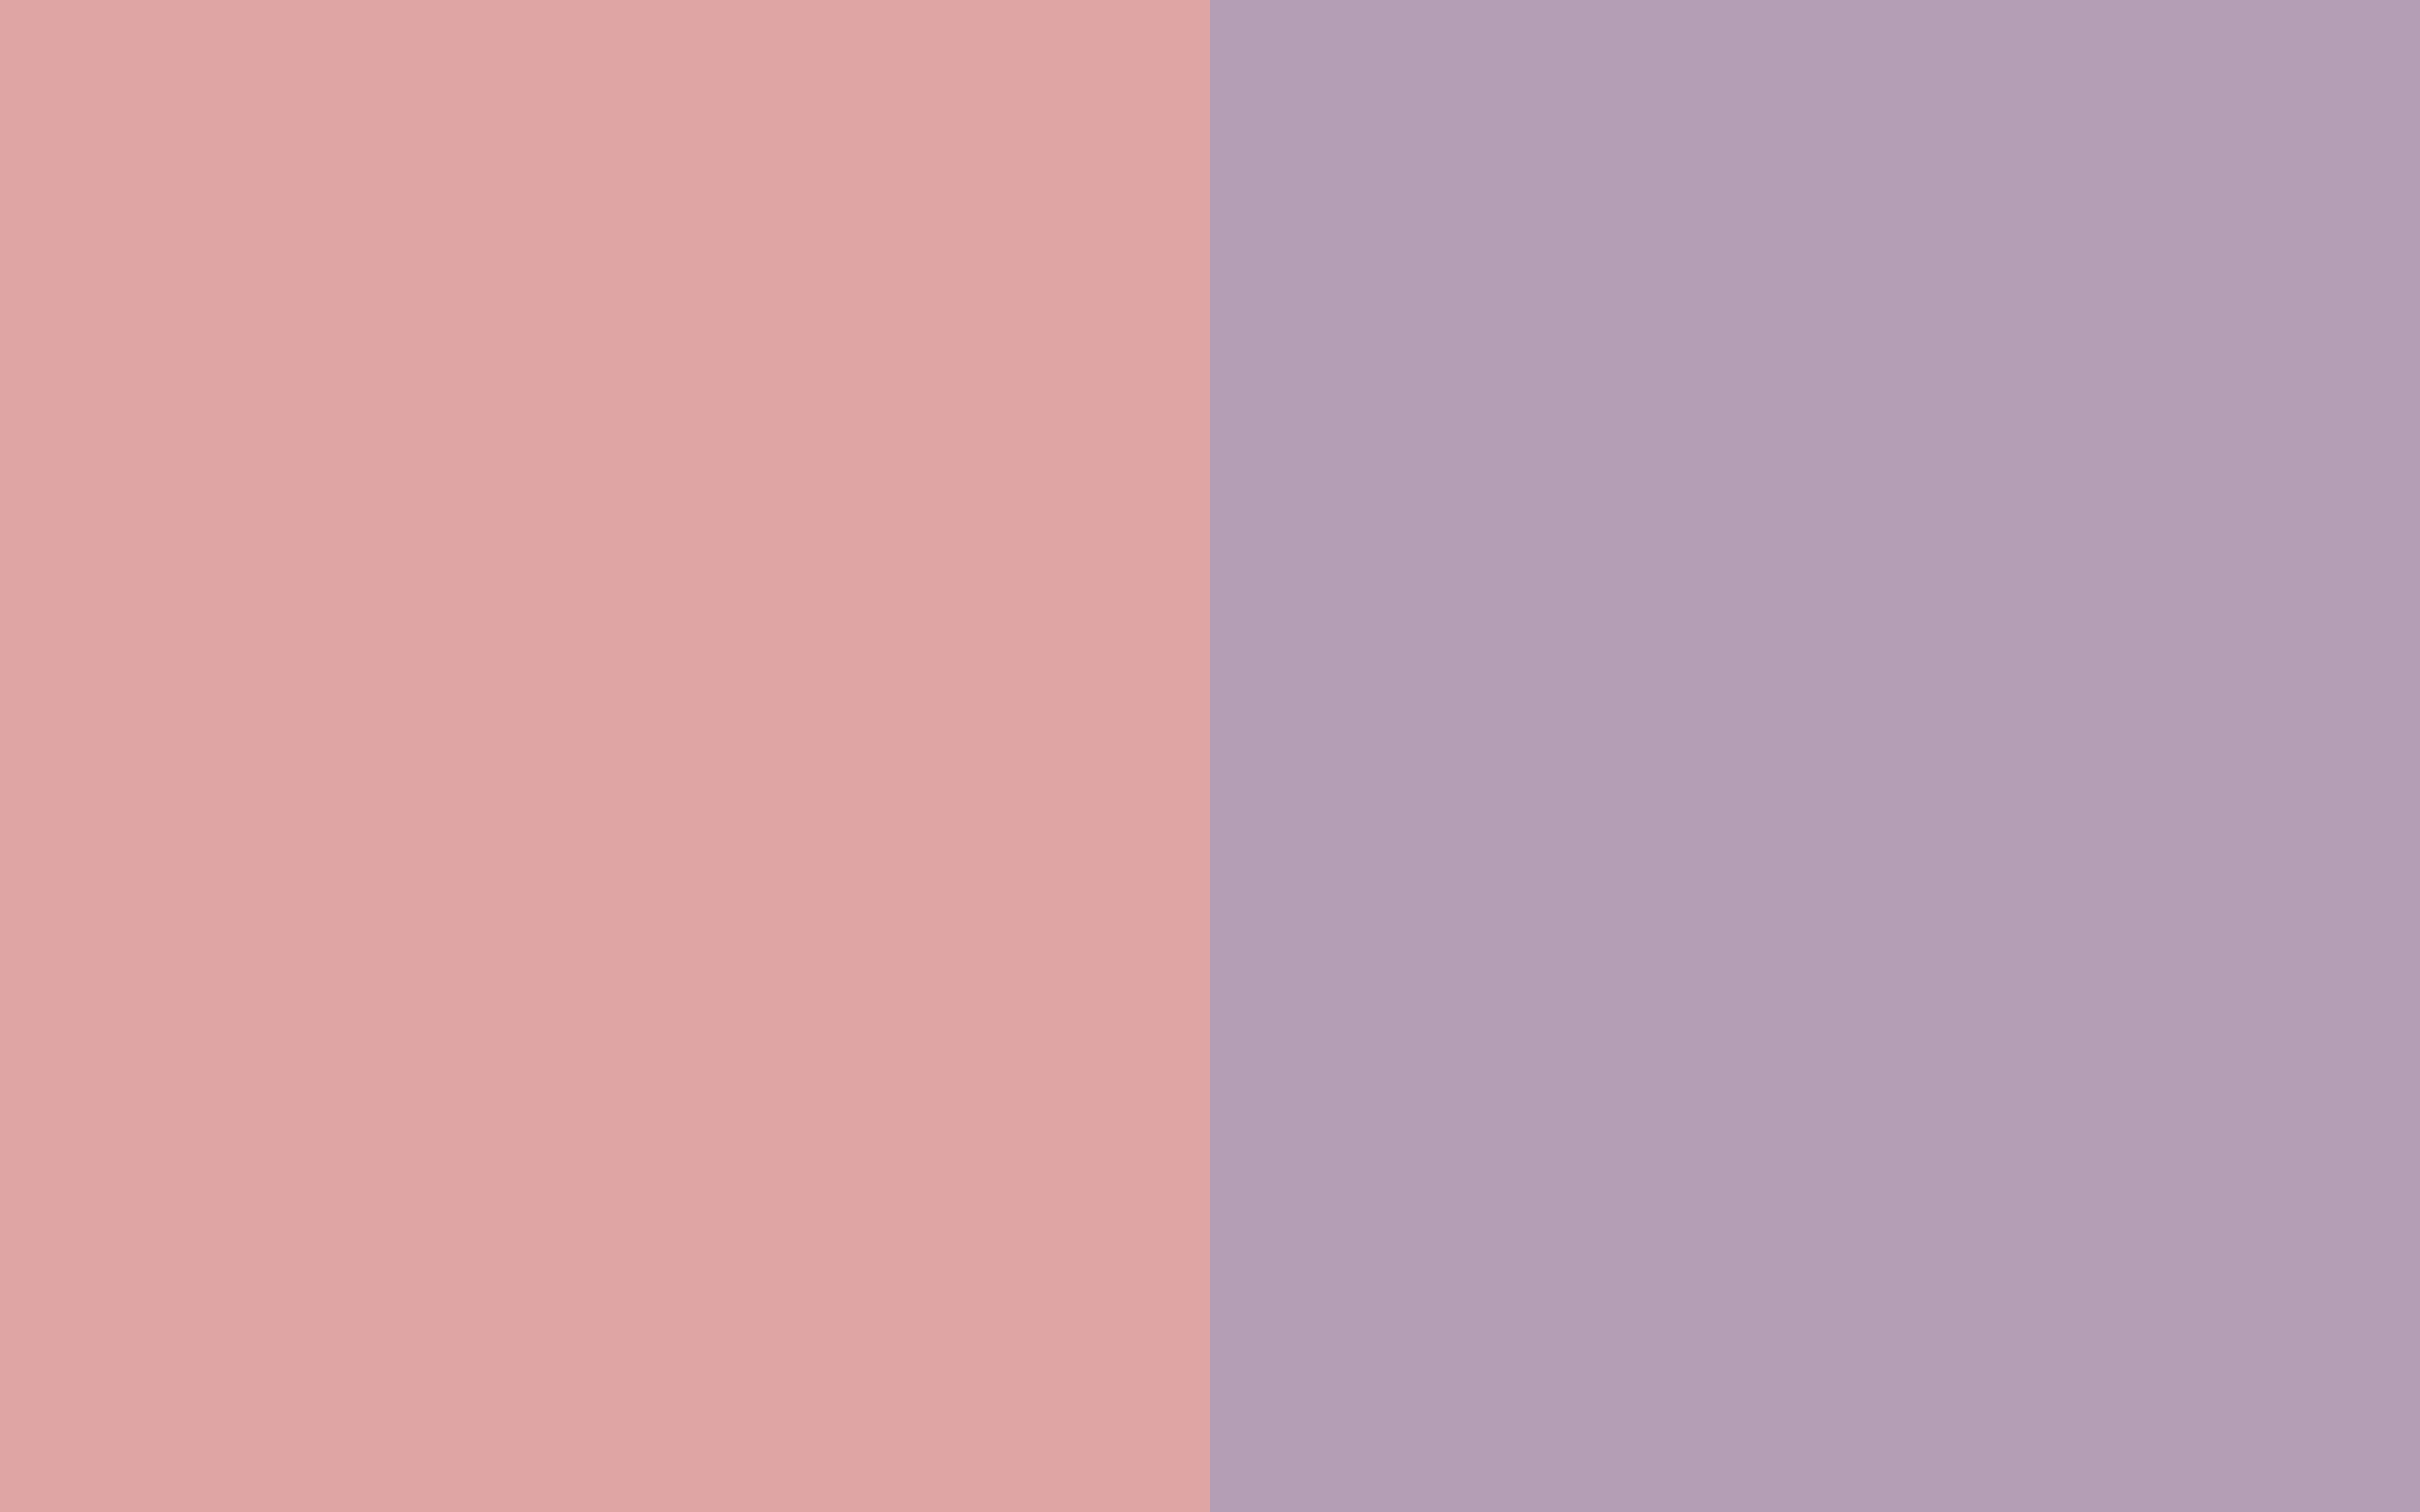 resolution Pastel Pink and Pastel Purple solid two color background